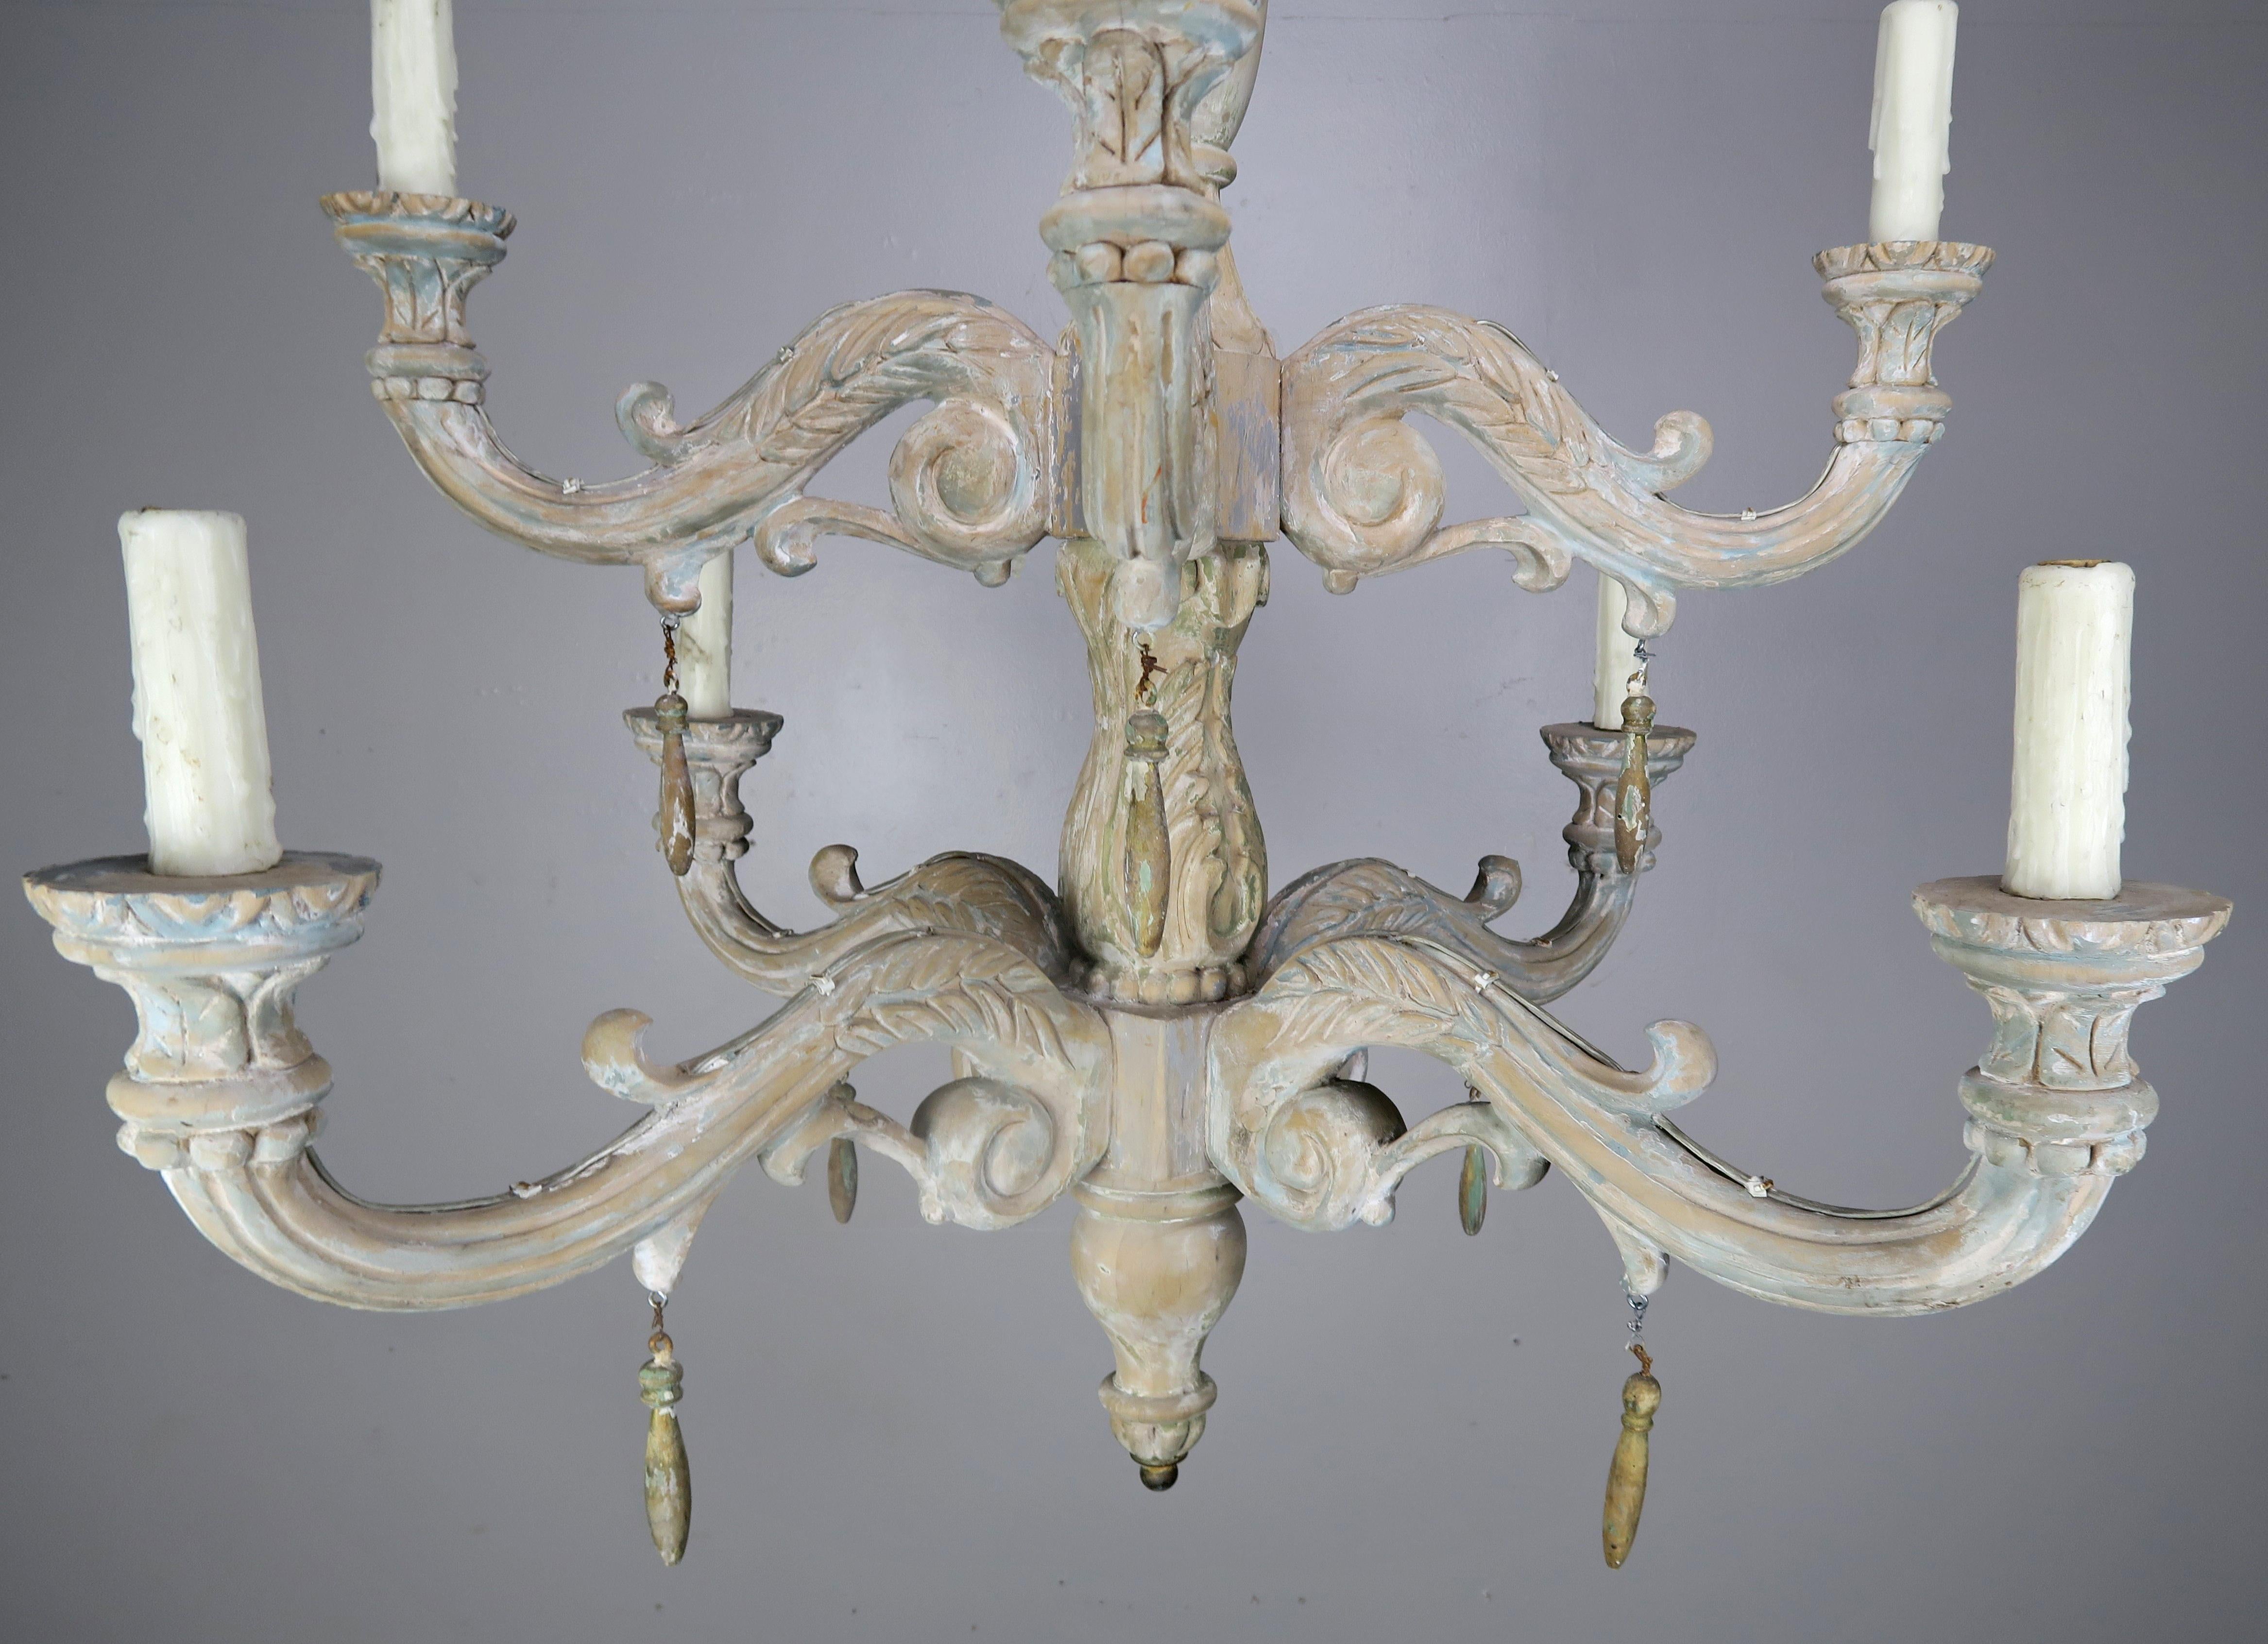 Rococo Eight-Light Carved Wood Chandelier with Tassels, 20th Century